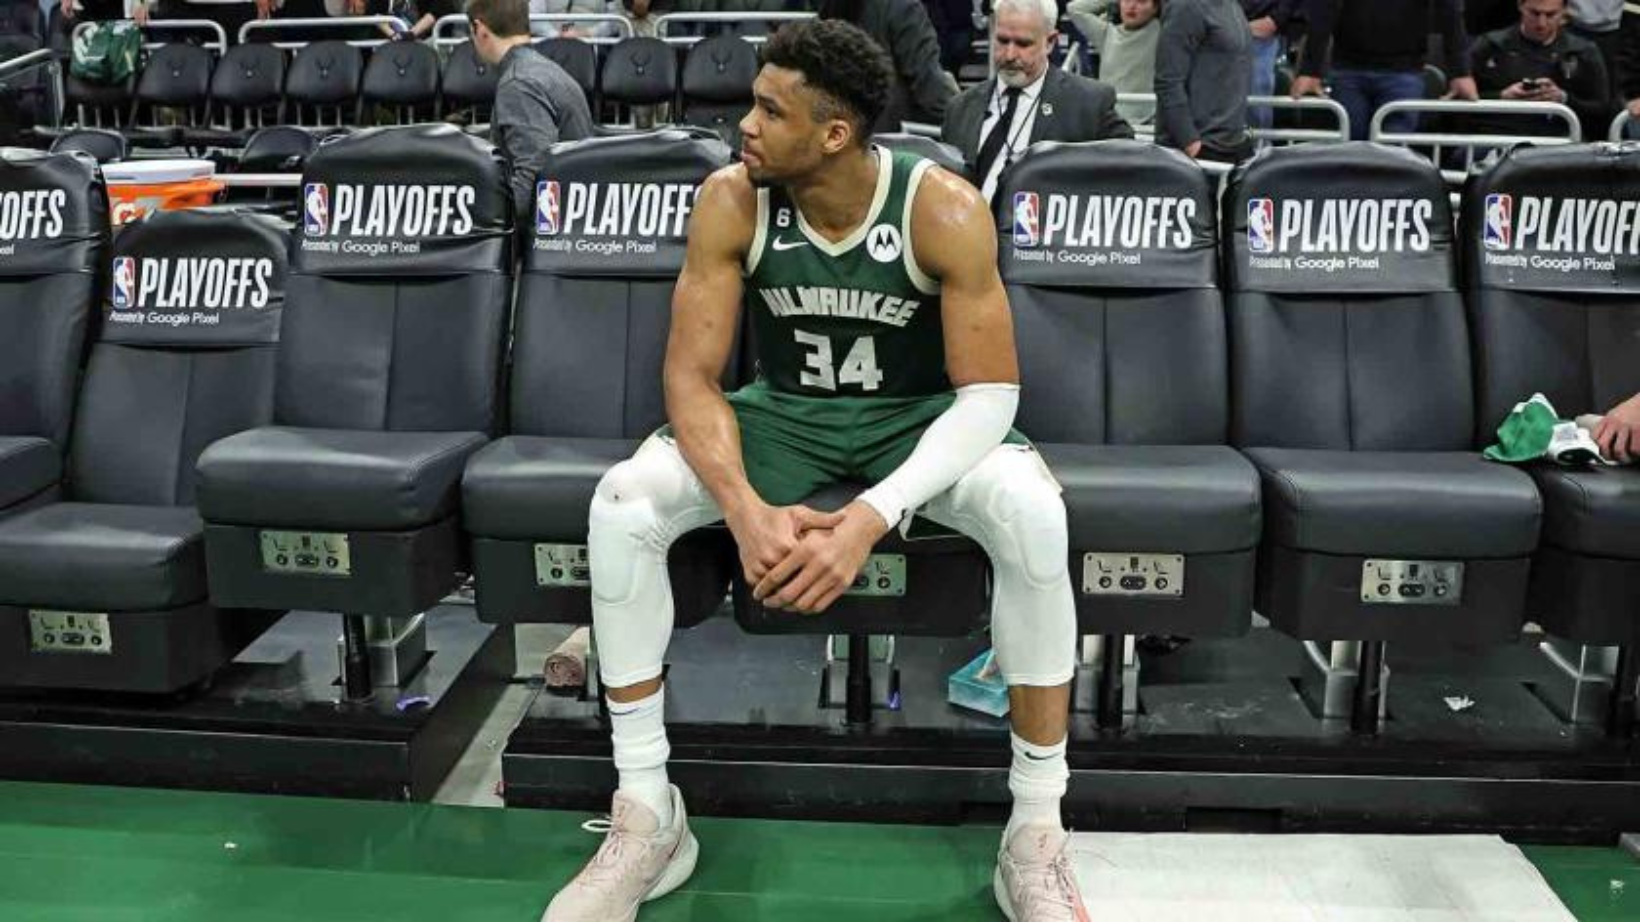 Giannis Antetokounmpo sits in the centre of a row of leather seats with the NBA logo and the word playoffs written on the back. Giannis is wearing his green game jersey and shorts looking off to left.